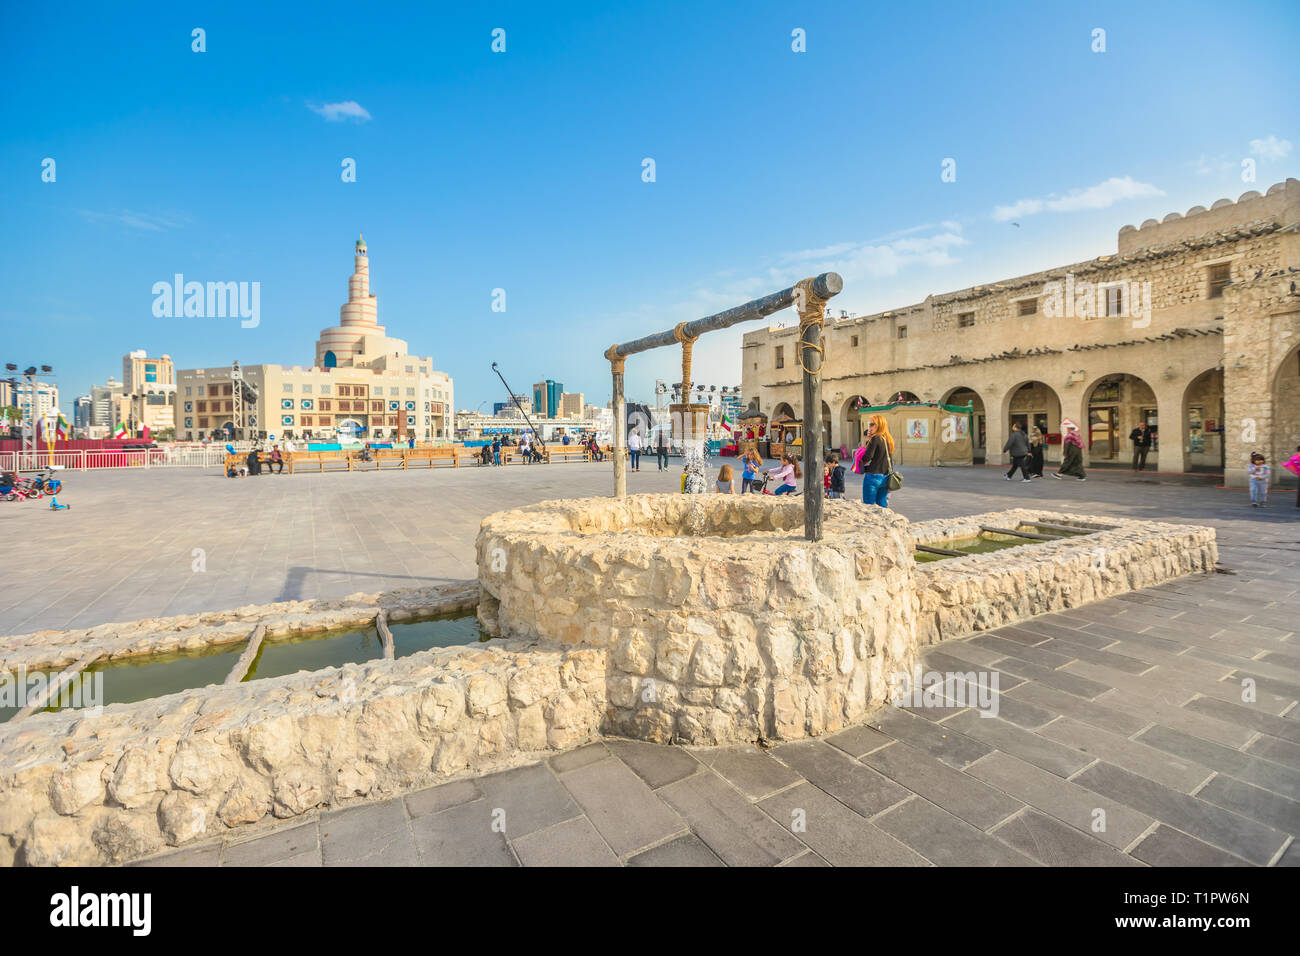 Doha, Qatar - February 20, 2019: old well fountain, famous landmark at Souq Waqif and Fanar Islamic Cultural Center with Spiral Mosque and Minaret on Stock Photo